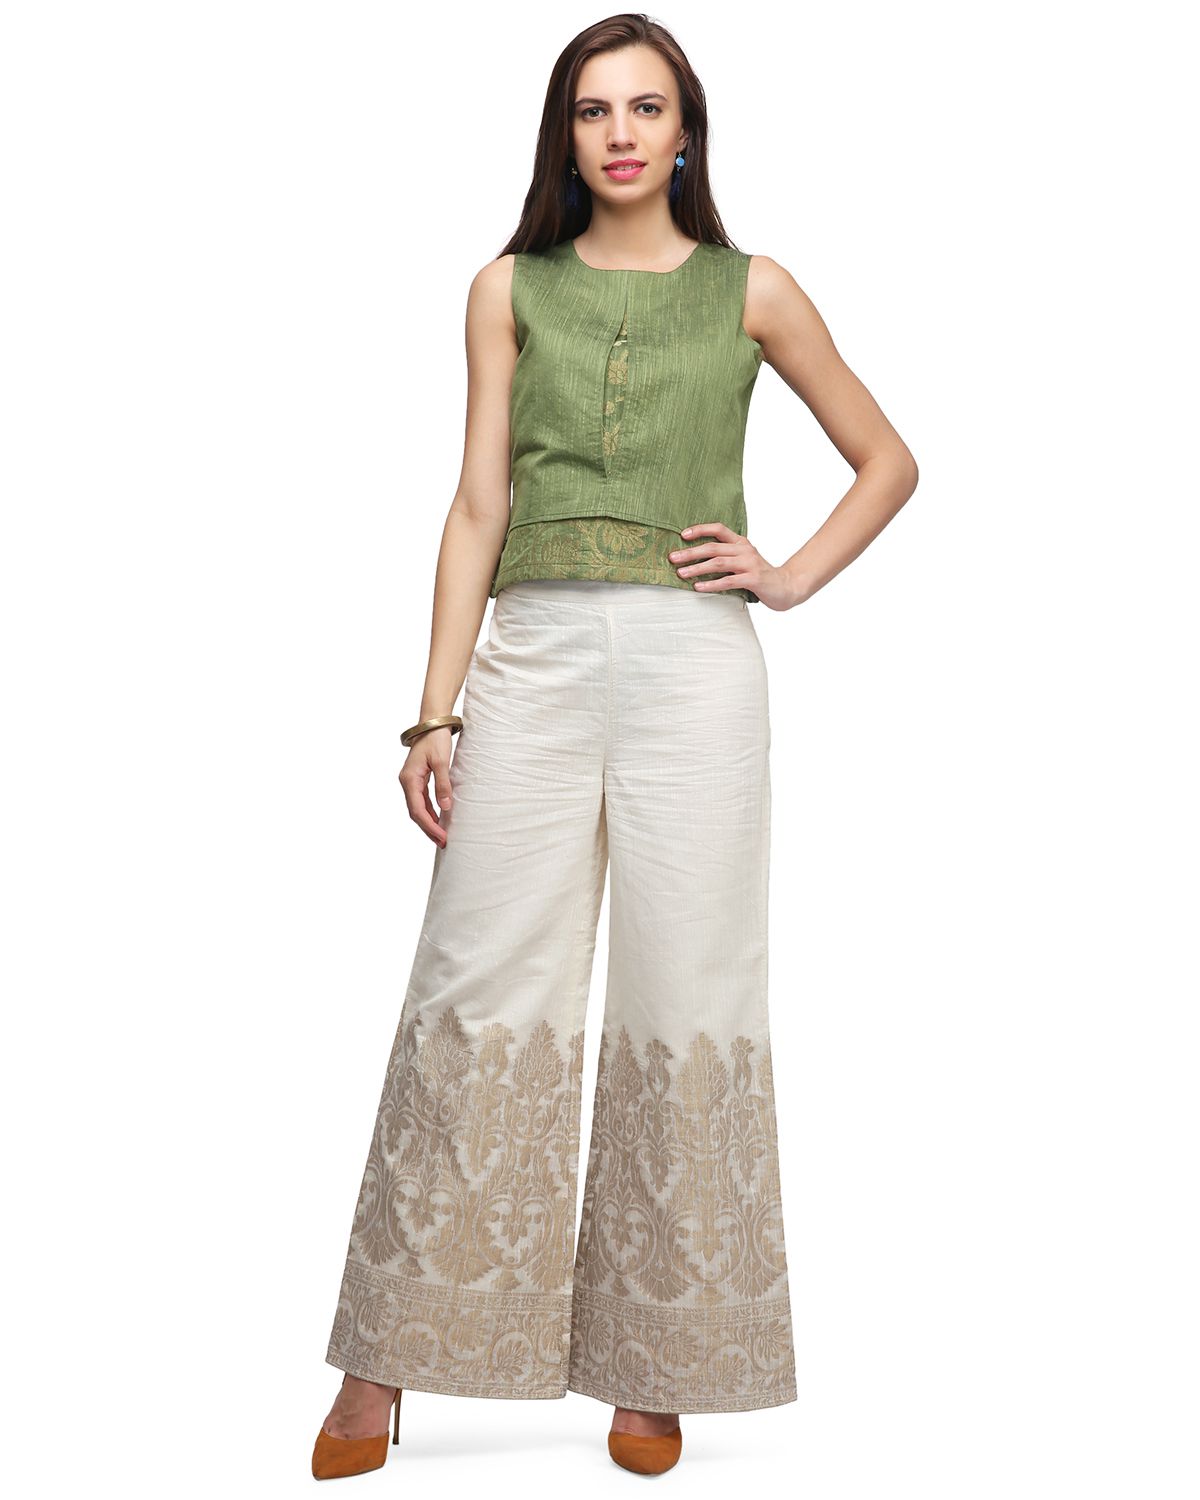 Buy Abhishti White Poly Cotton Palazzos Online at Best Prices in India ...